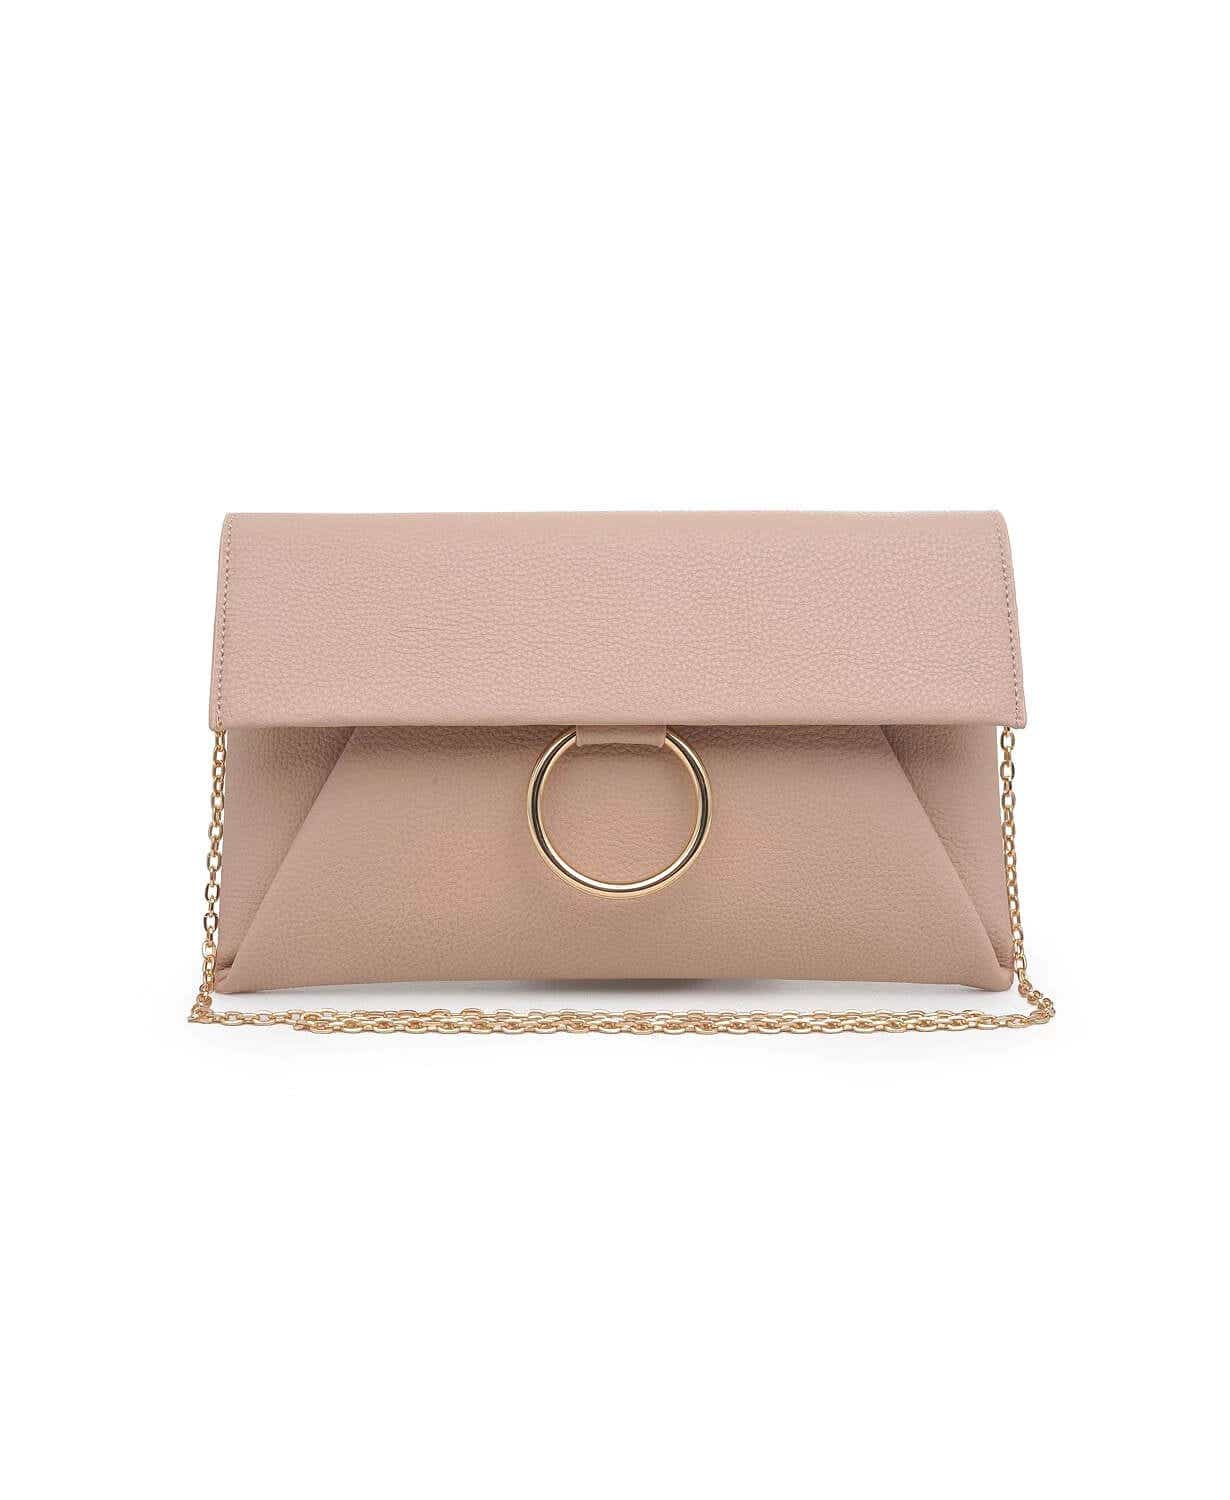 nude clutch with gold details